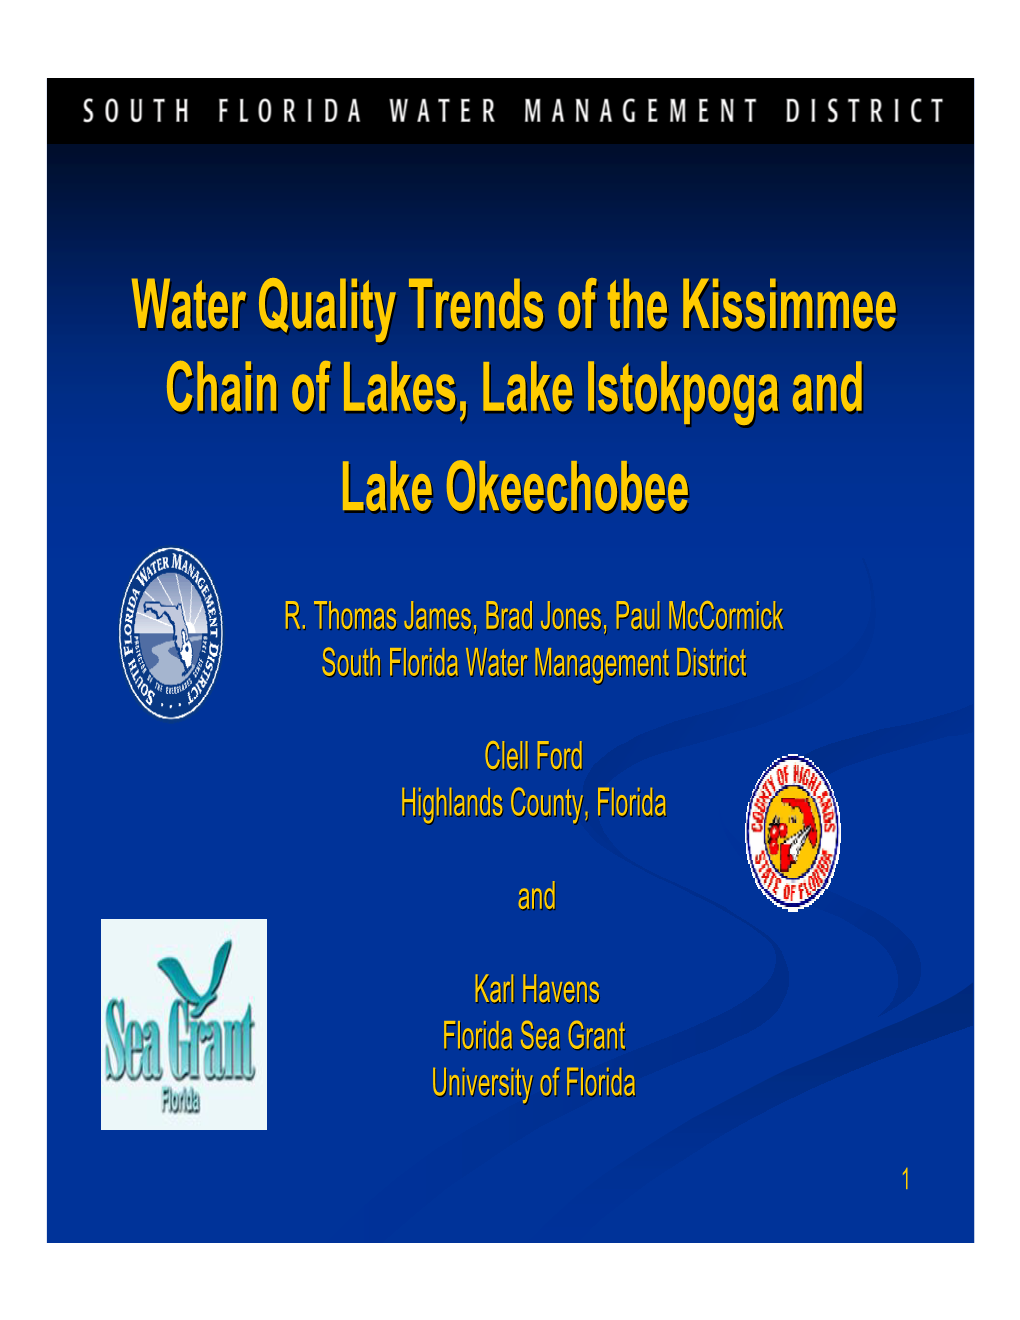 Water Quality Trends of the Kissimmee Chain of Lakes, Lake